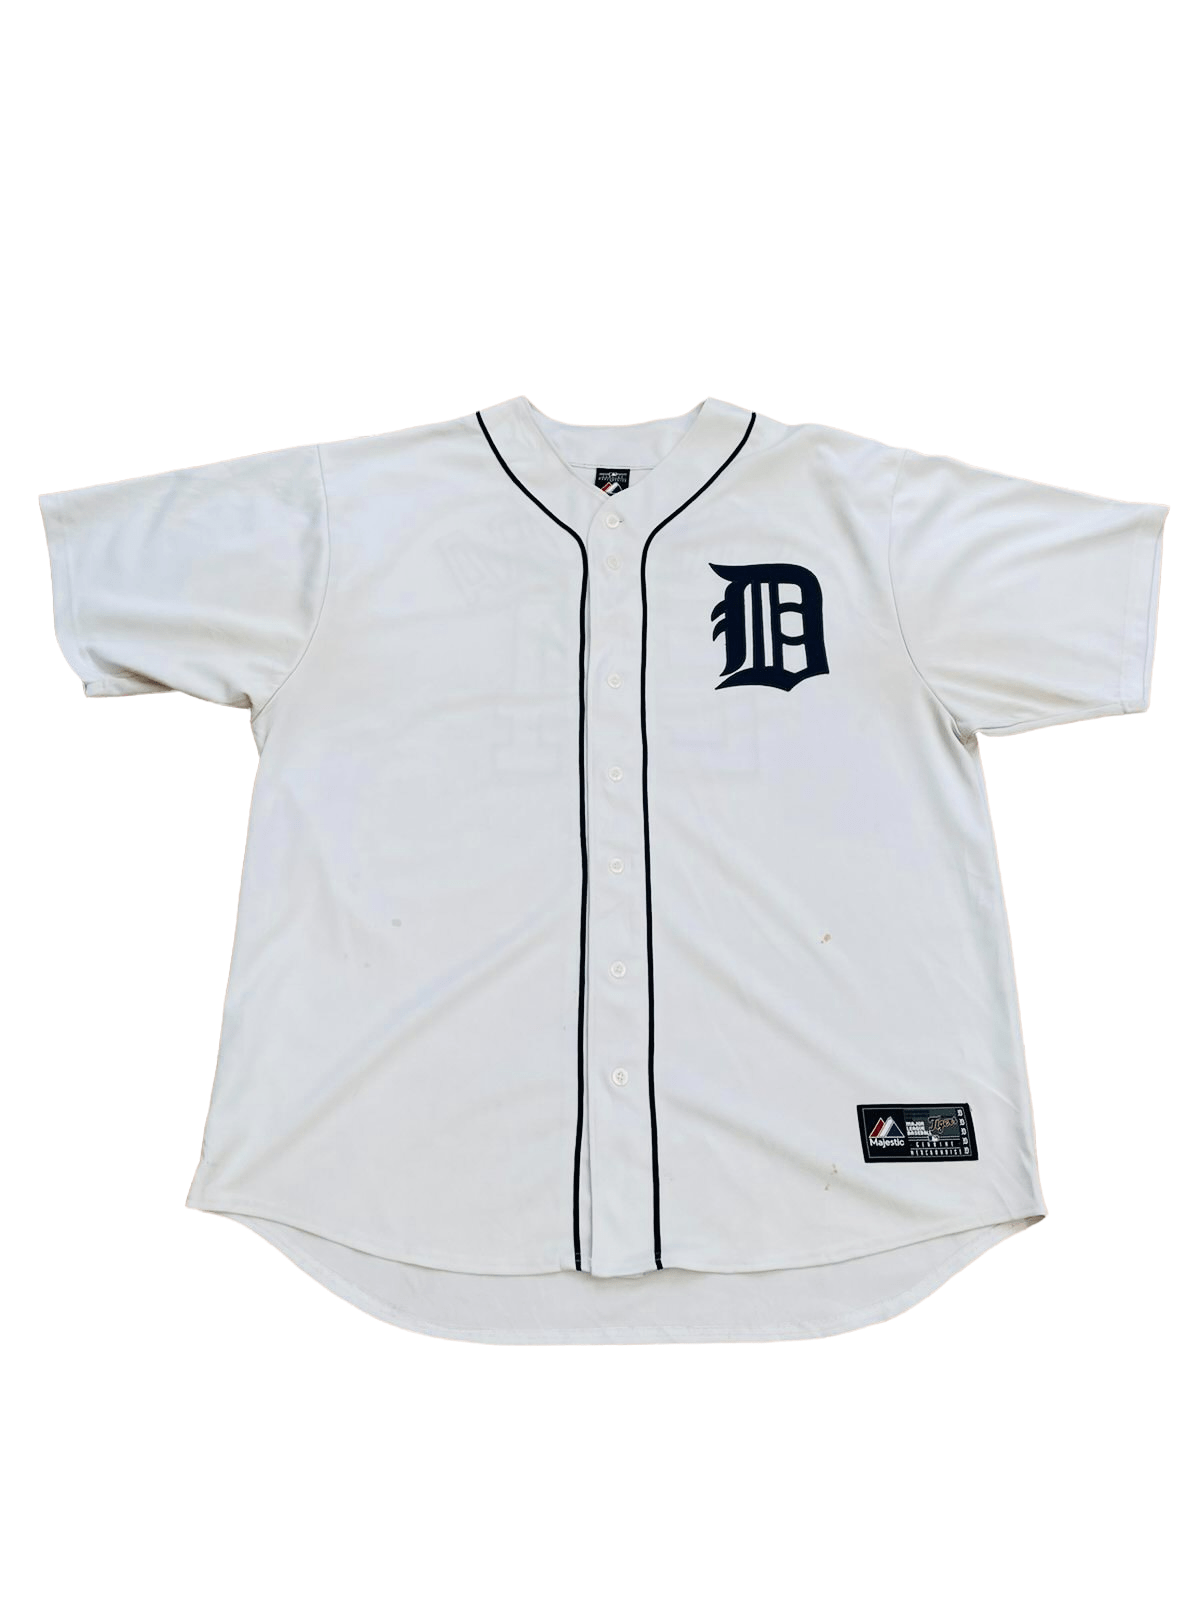 LOPEZ size 42 #75 2022 DETROIT TIGERS game jersey issued unused home white  MLB